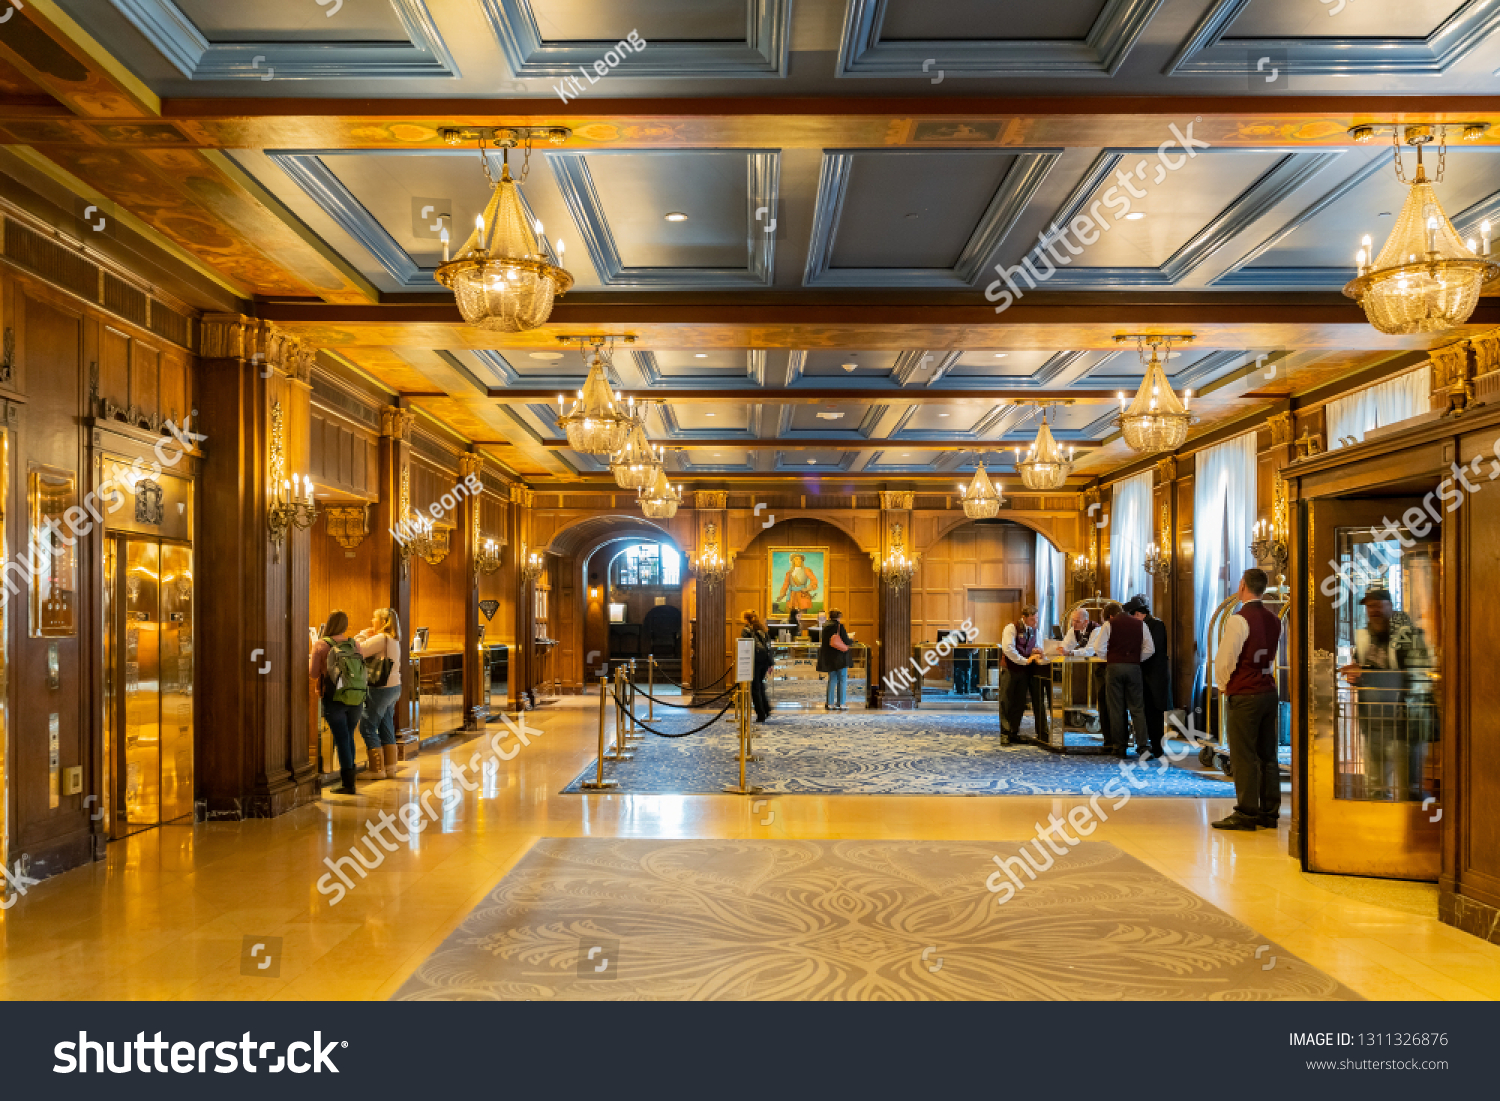 Quebec, OCT 1: Interior view of the famous Fairmont Le Château Frontenac on OCT 1, 2018 at Quebec, Canada #1311326876